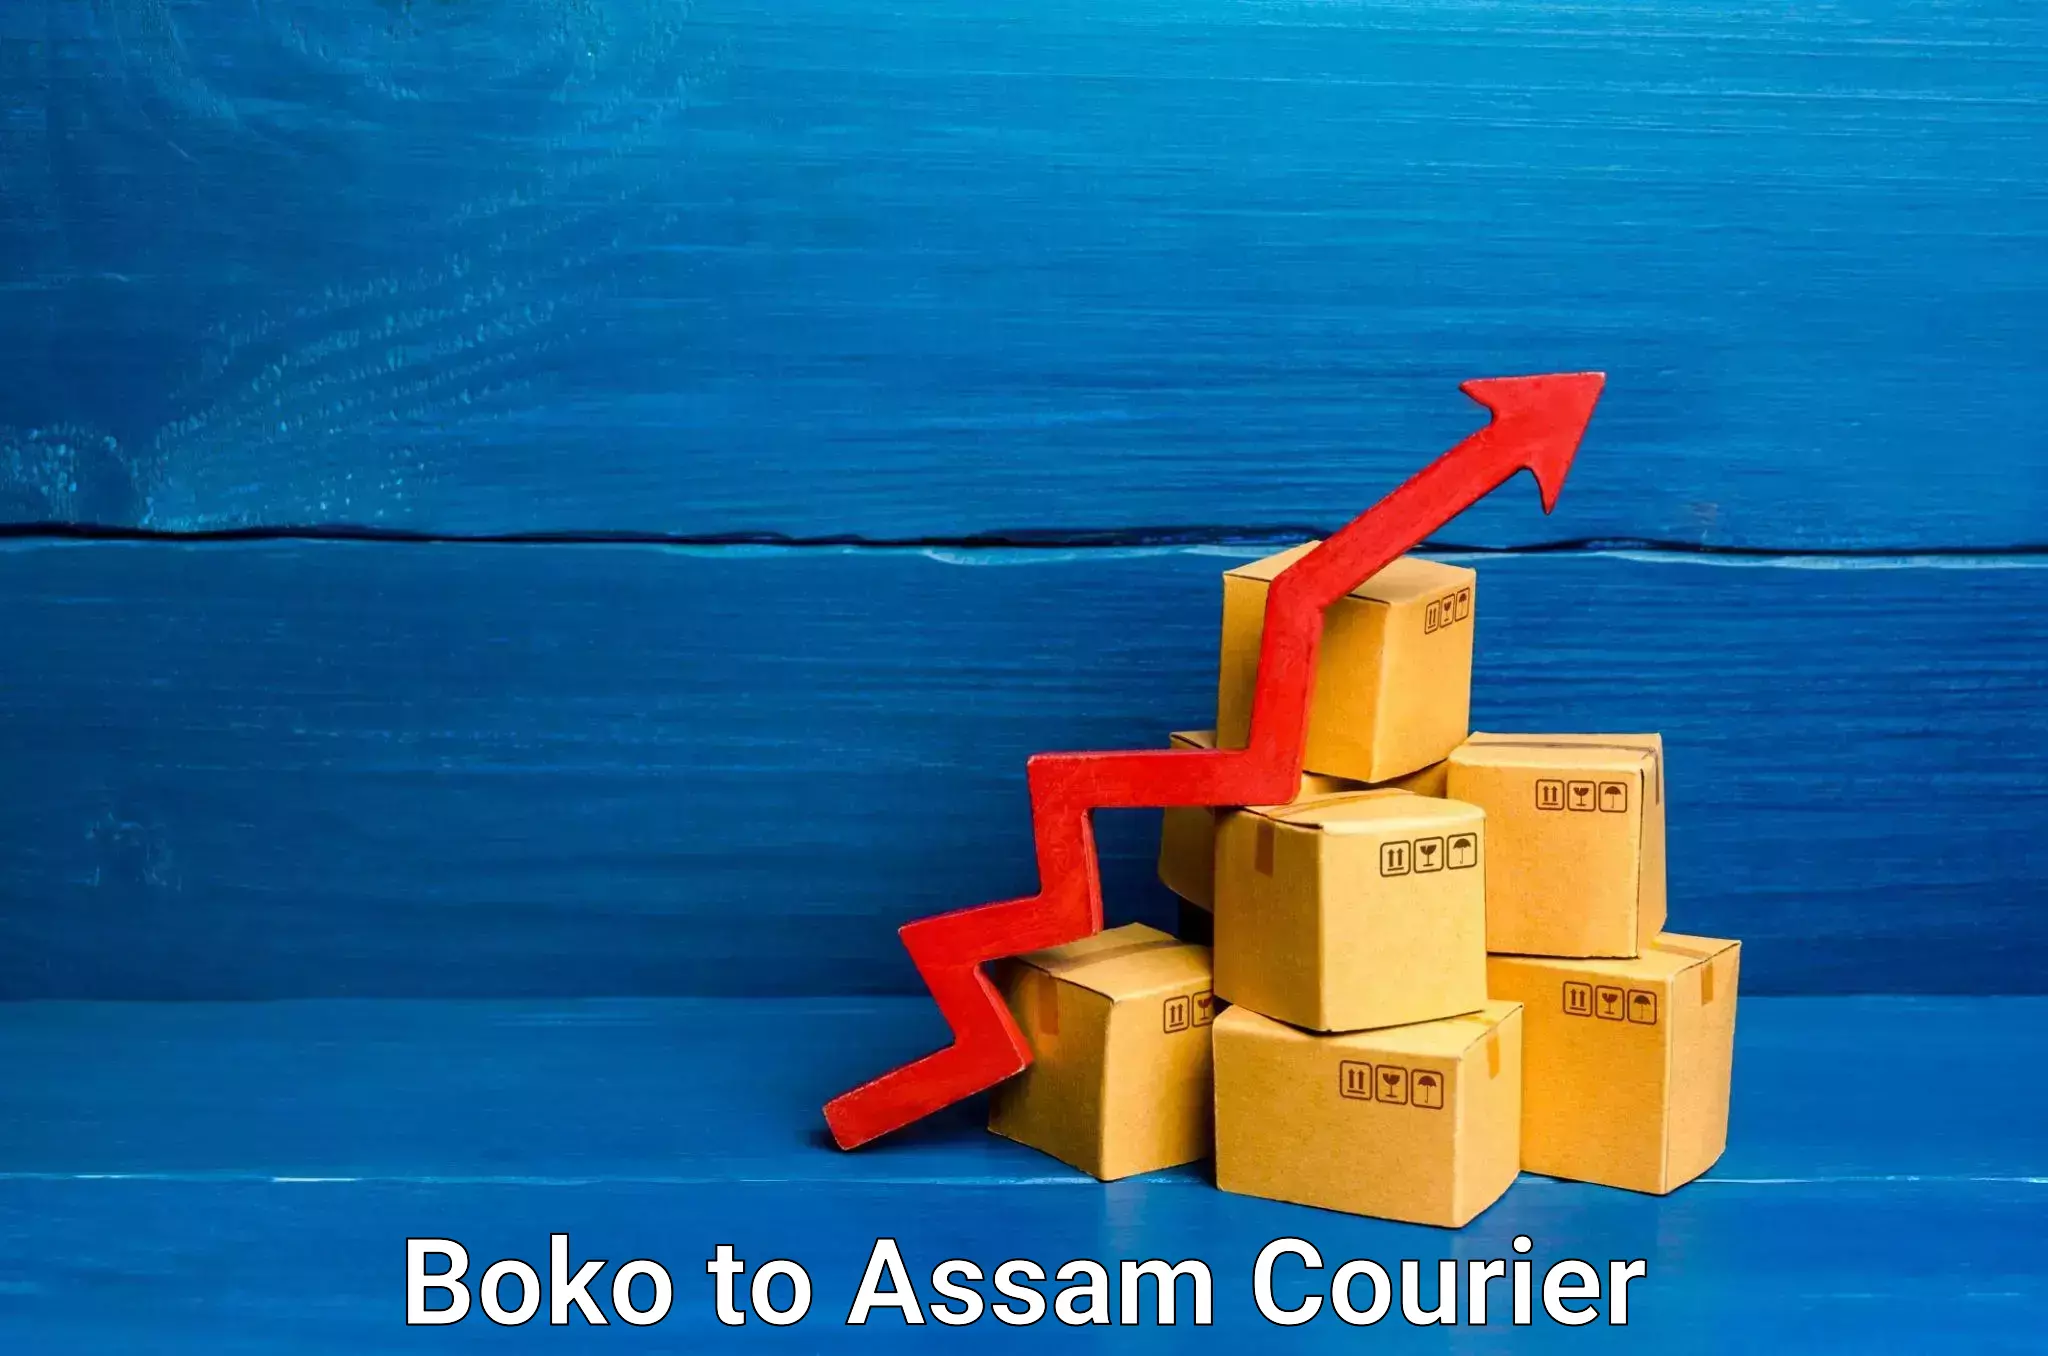 Smart shipping technology in Boko to Assam